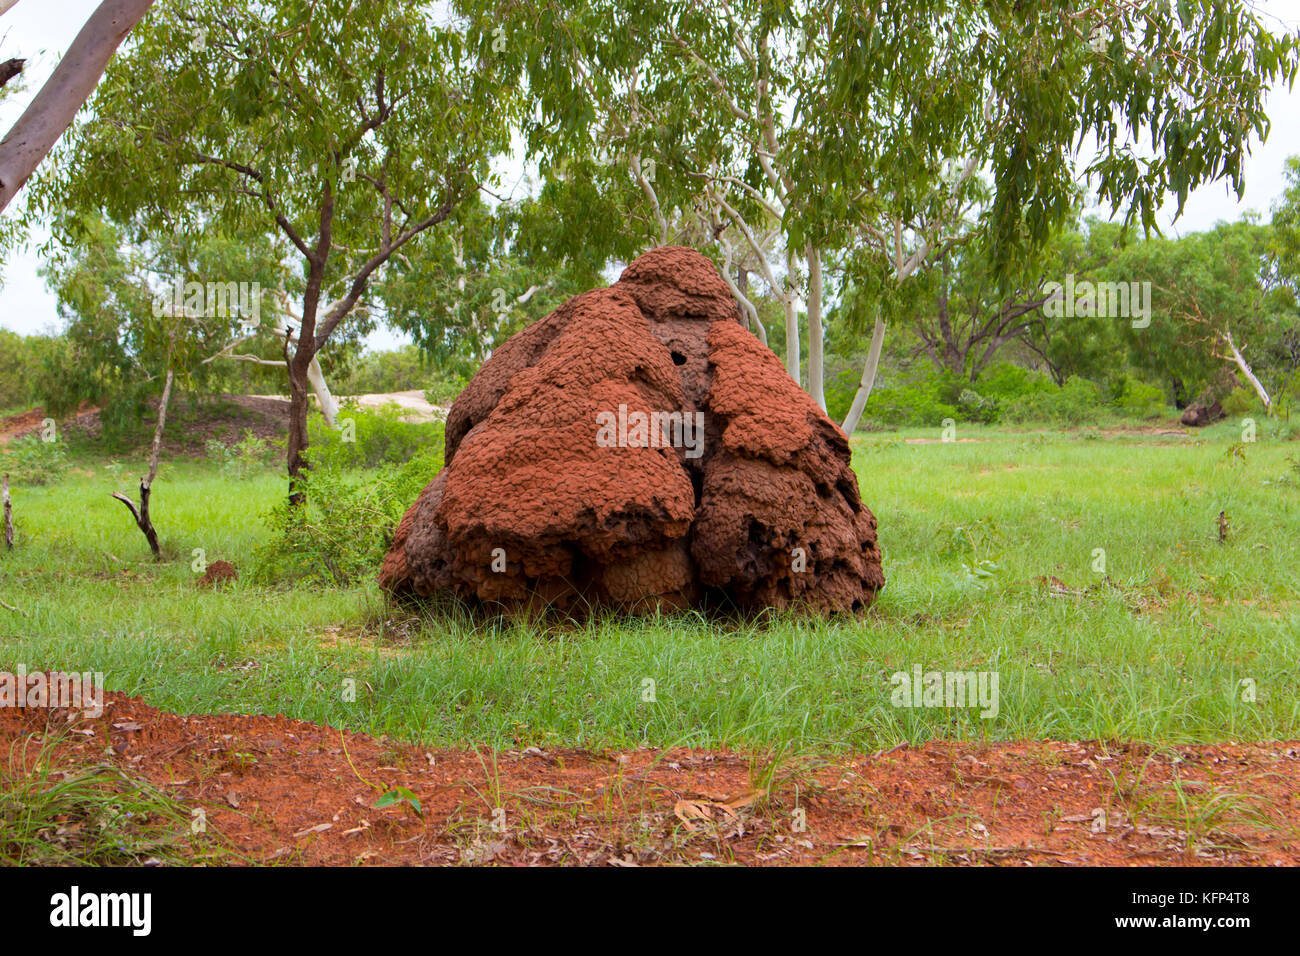 Termite mound ant nests, the most biologically diverse in an entire habitat on the way to Roebuck Bay, Broome, North Western Australia. Stock Photo